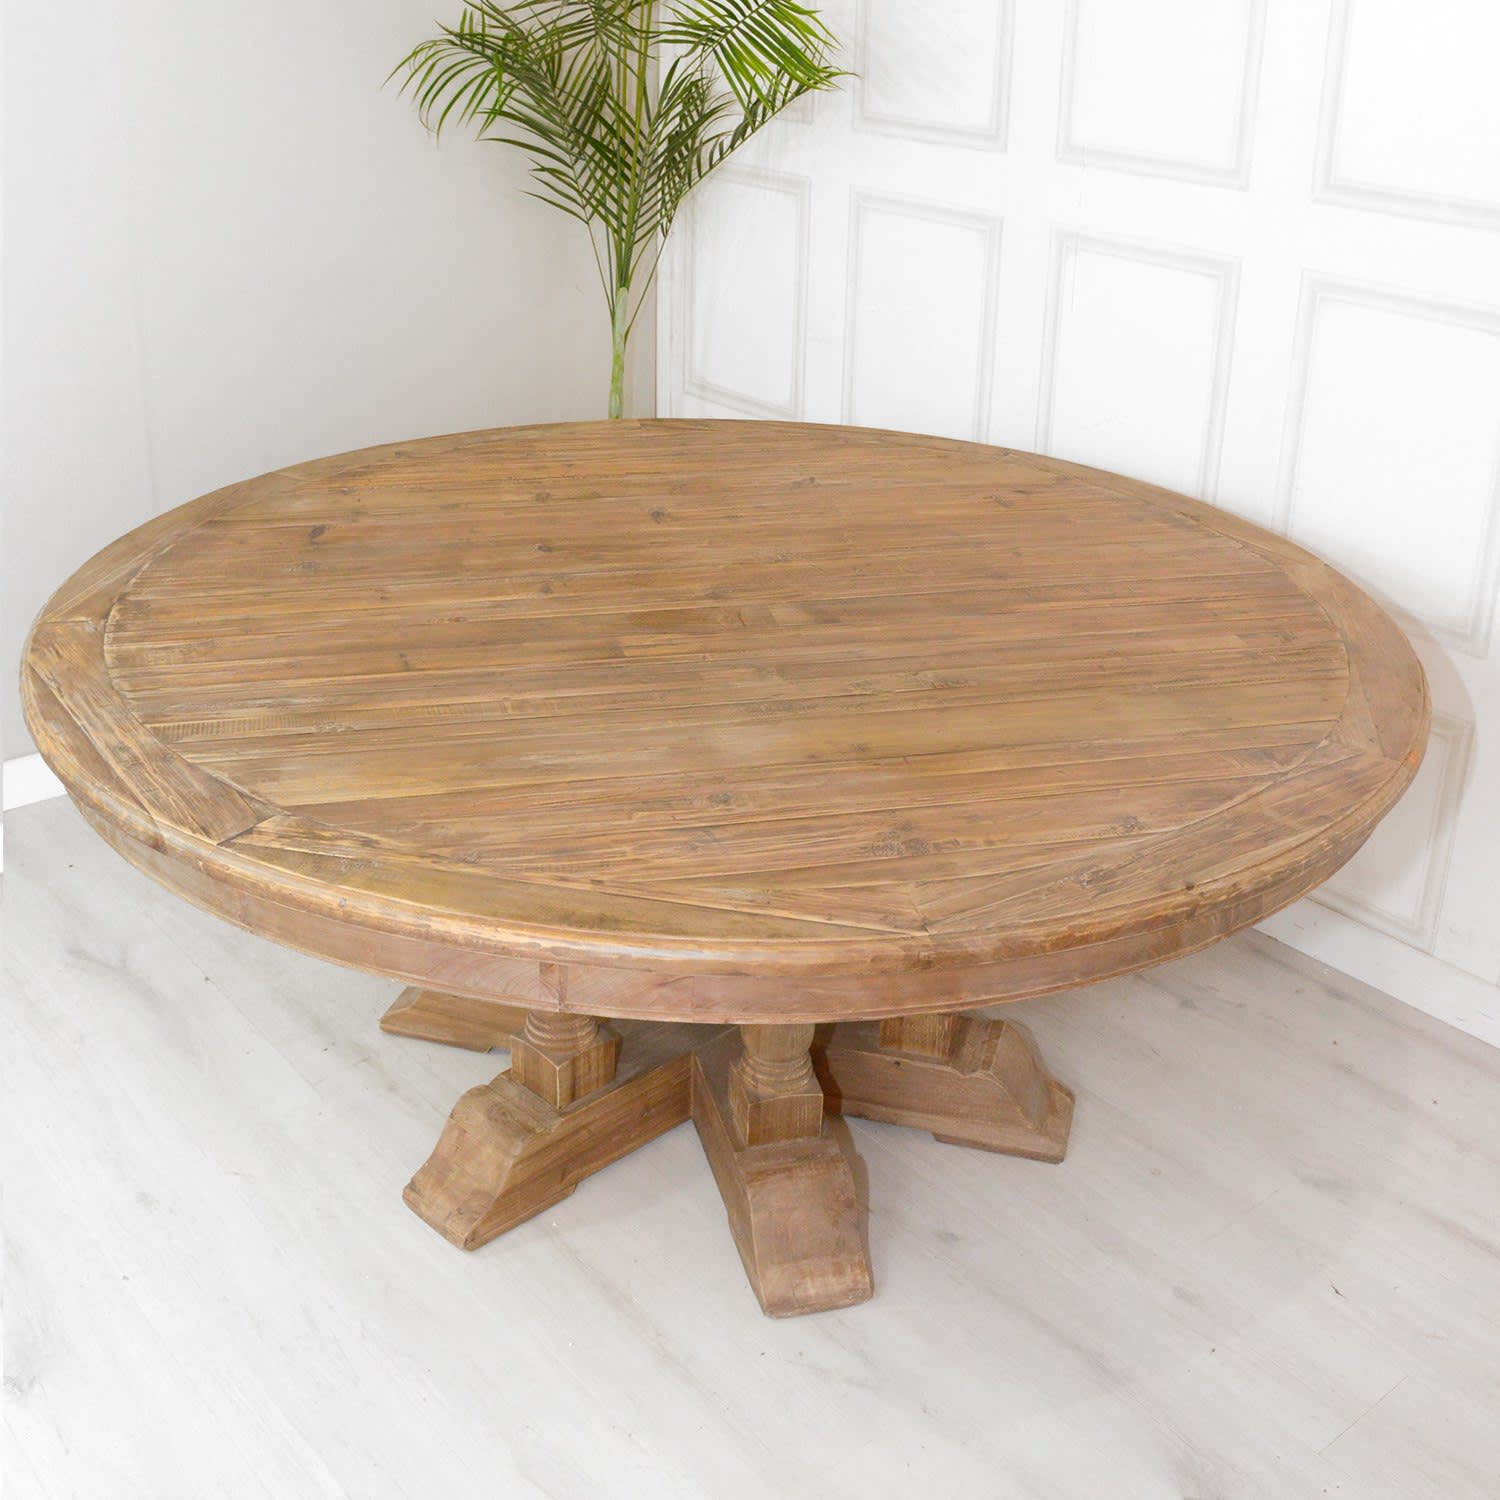 Reclaimed Timber Round Dining Table Medium/Large